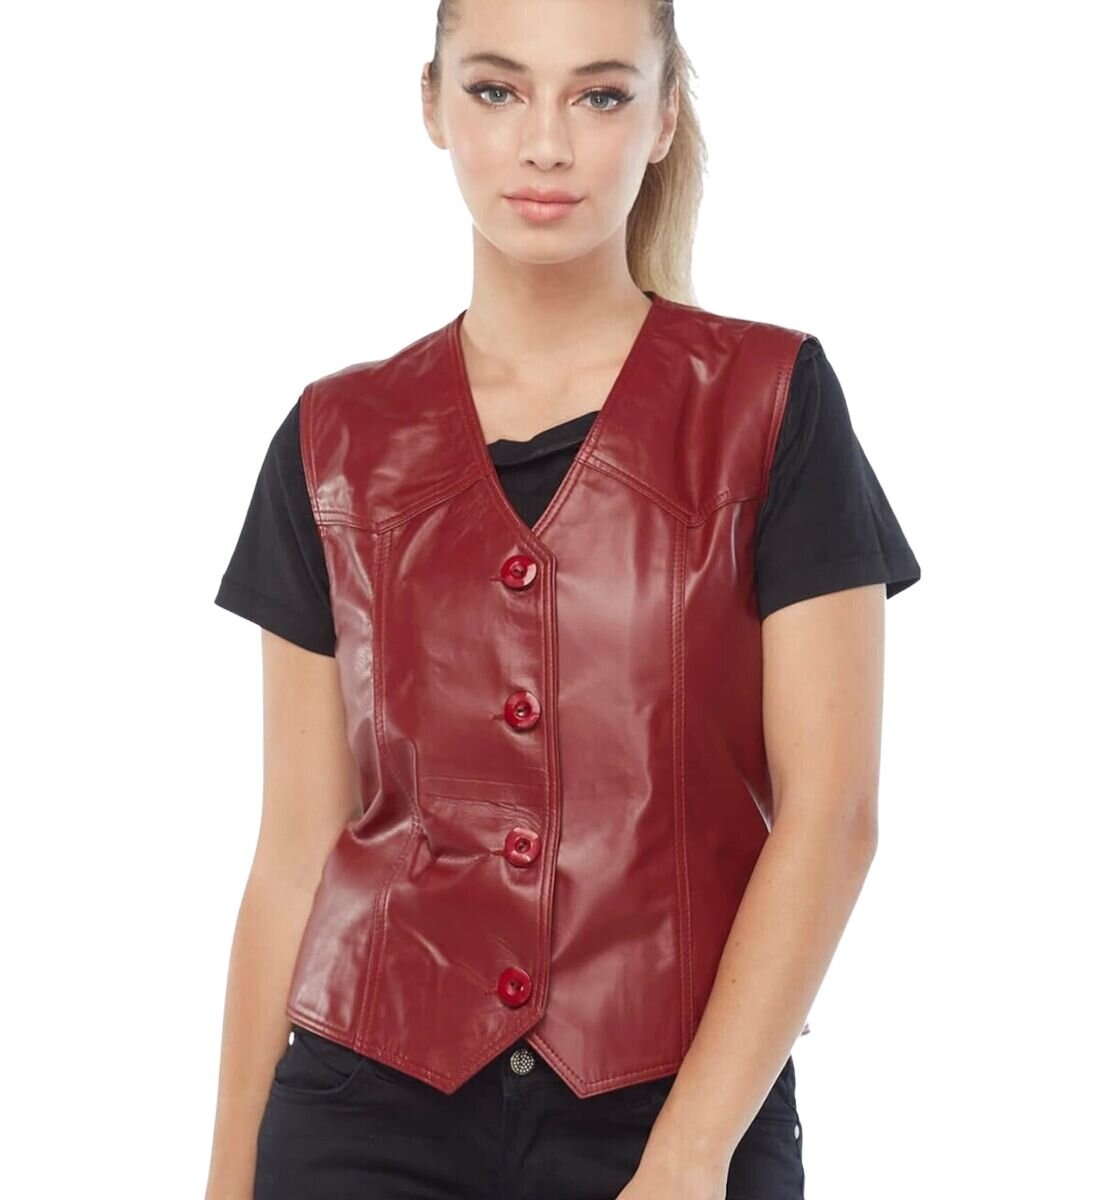 Cherry Blossom Chic Leather Vest